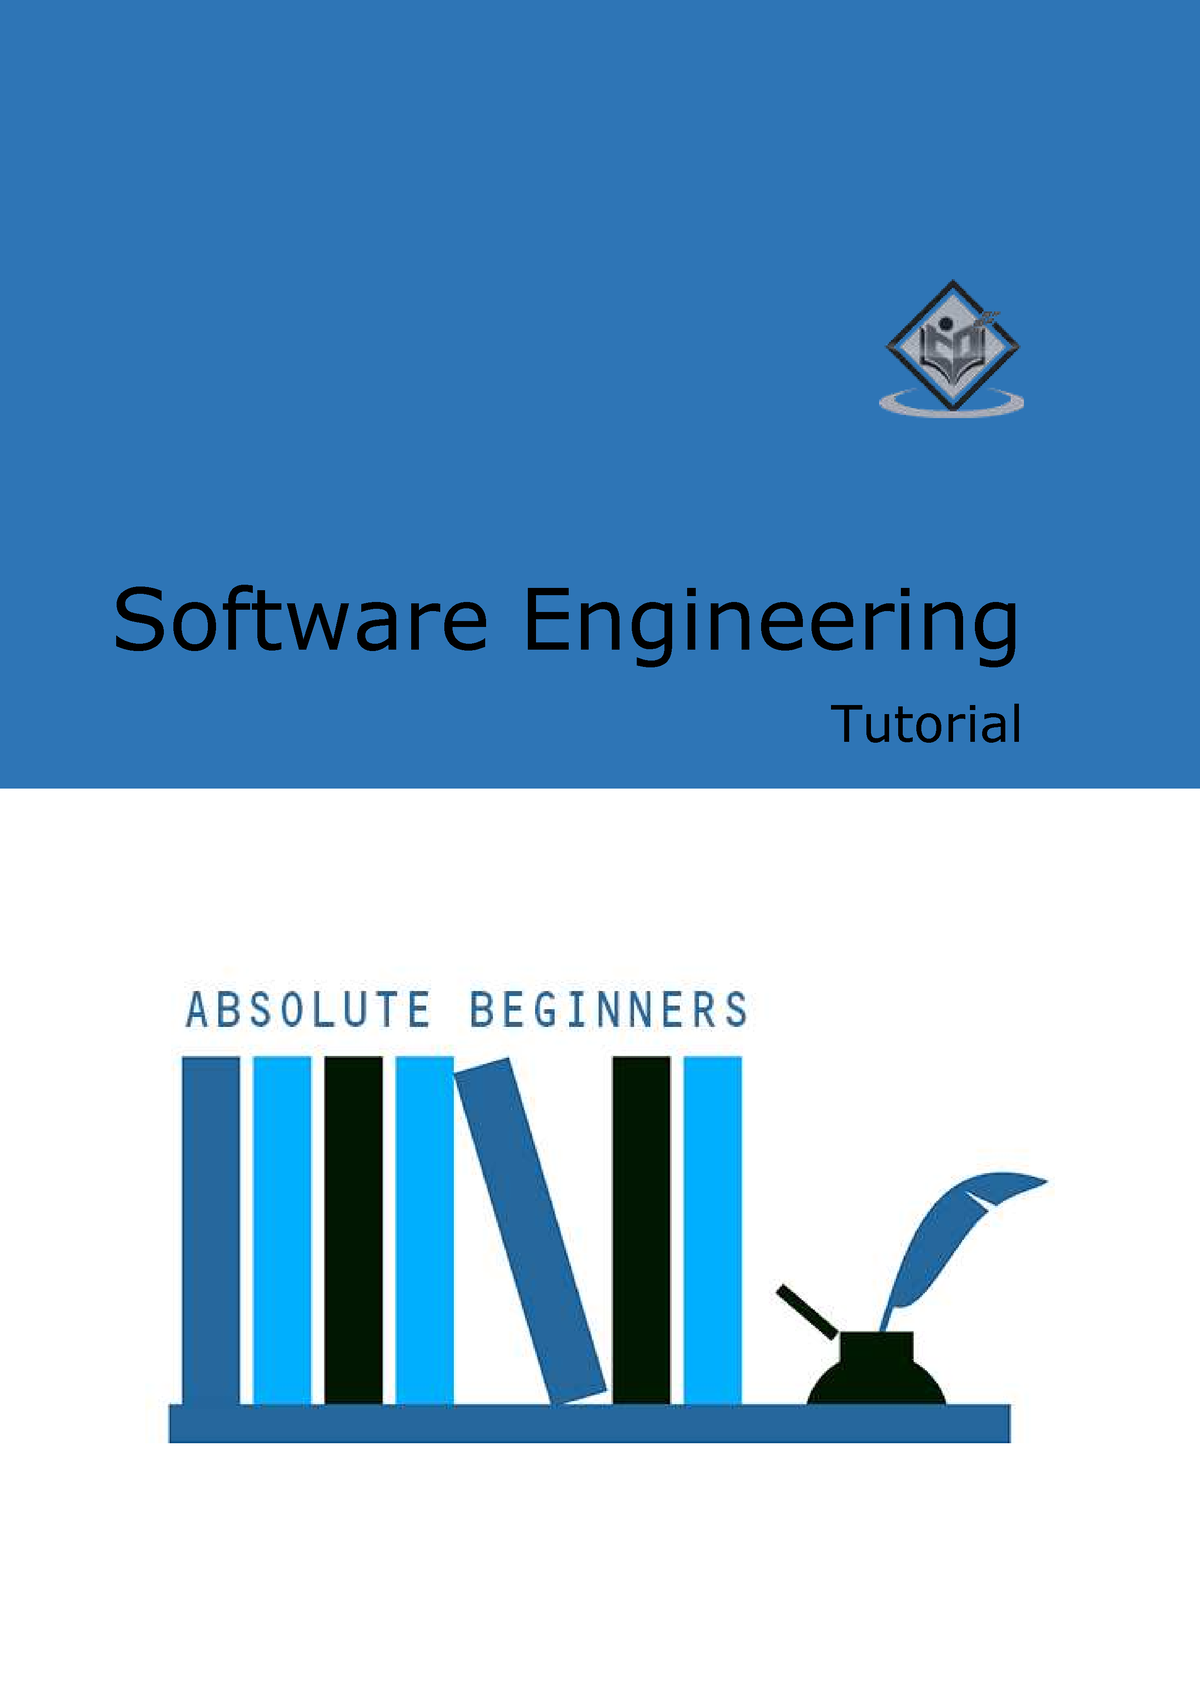 Software Engineering Tutorial 2 Software Engineering Tutorial Simply Easy Learning I Table Of 5690